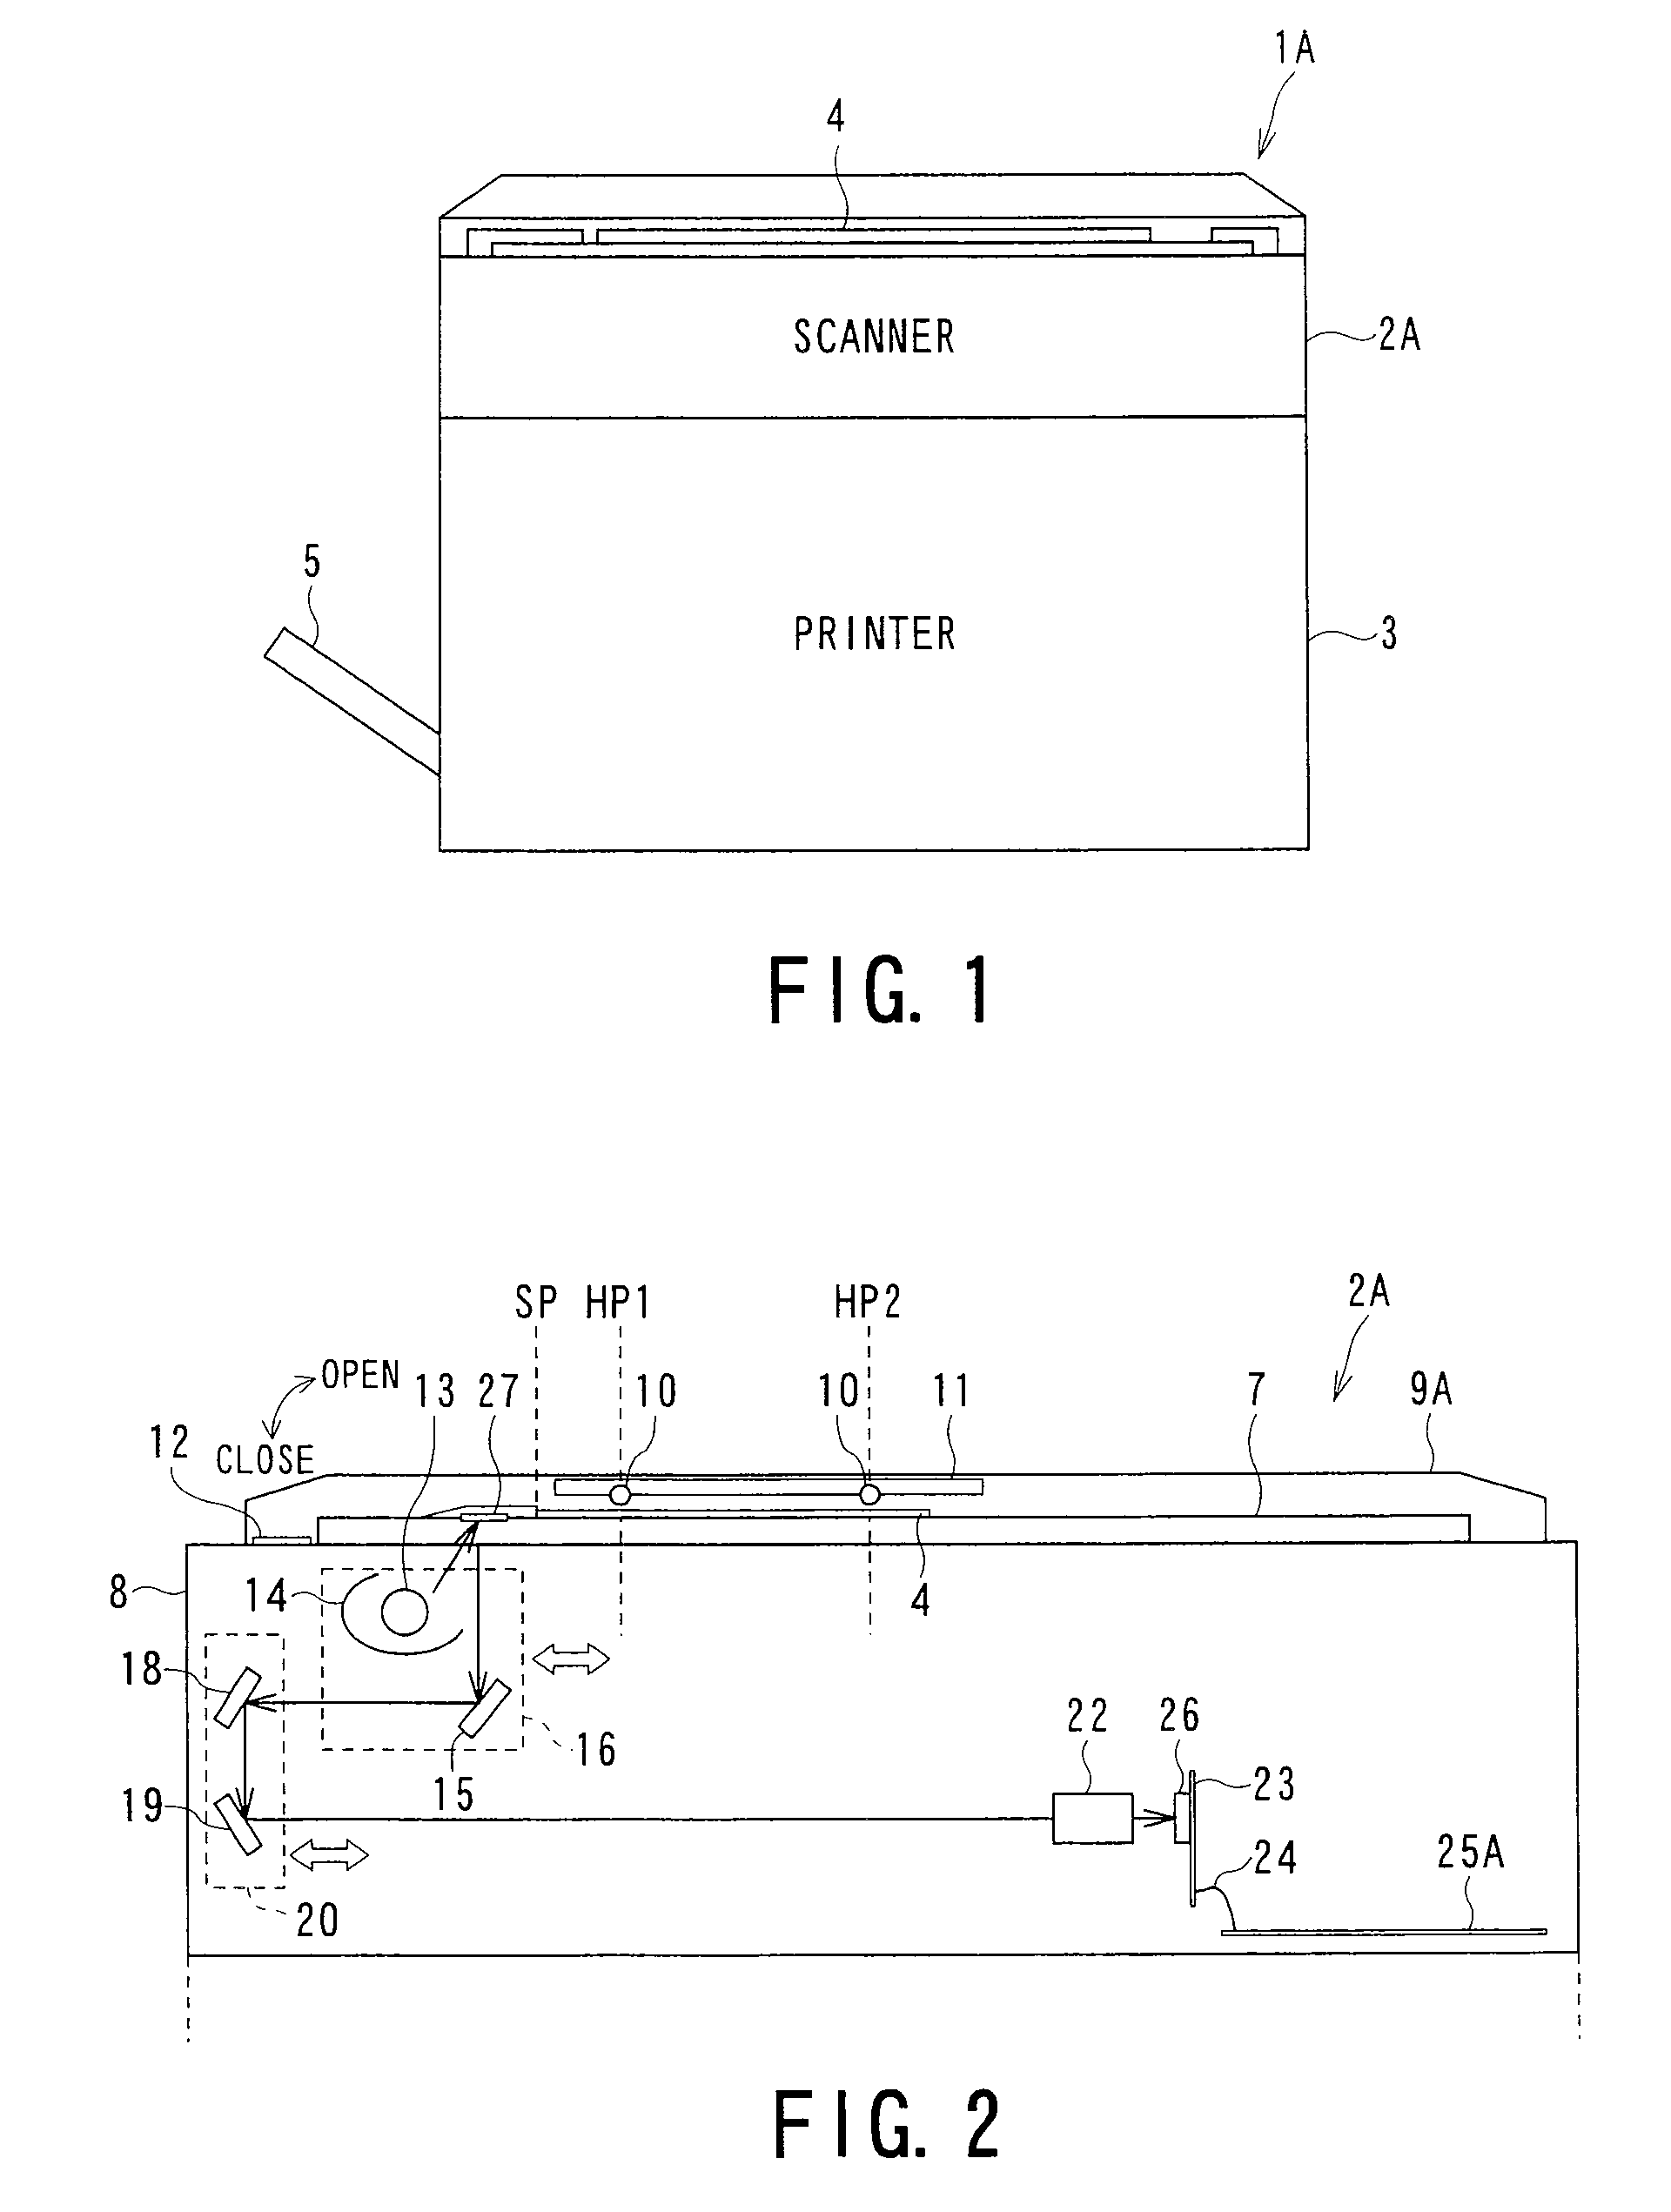 Image copier and image copying method